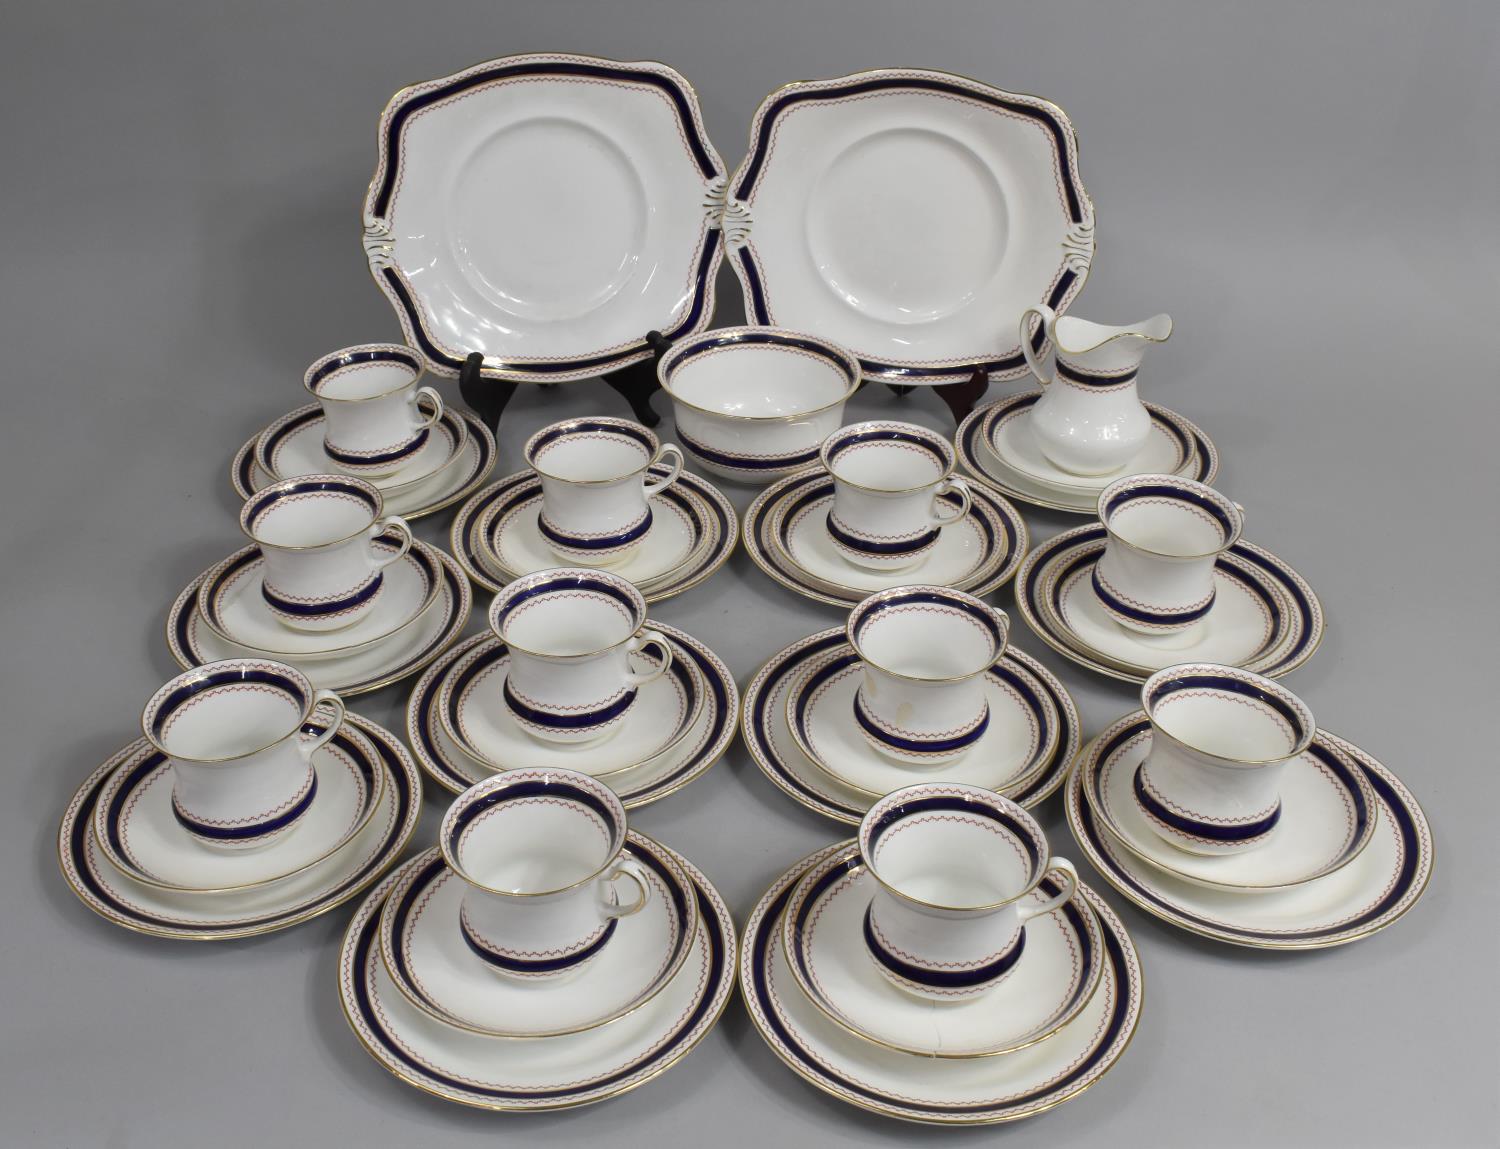 A Tuscan China Cobalt Blue and Geometric Trim Tea Set to comprise Cups, Saucers, Side Plates, Milk